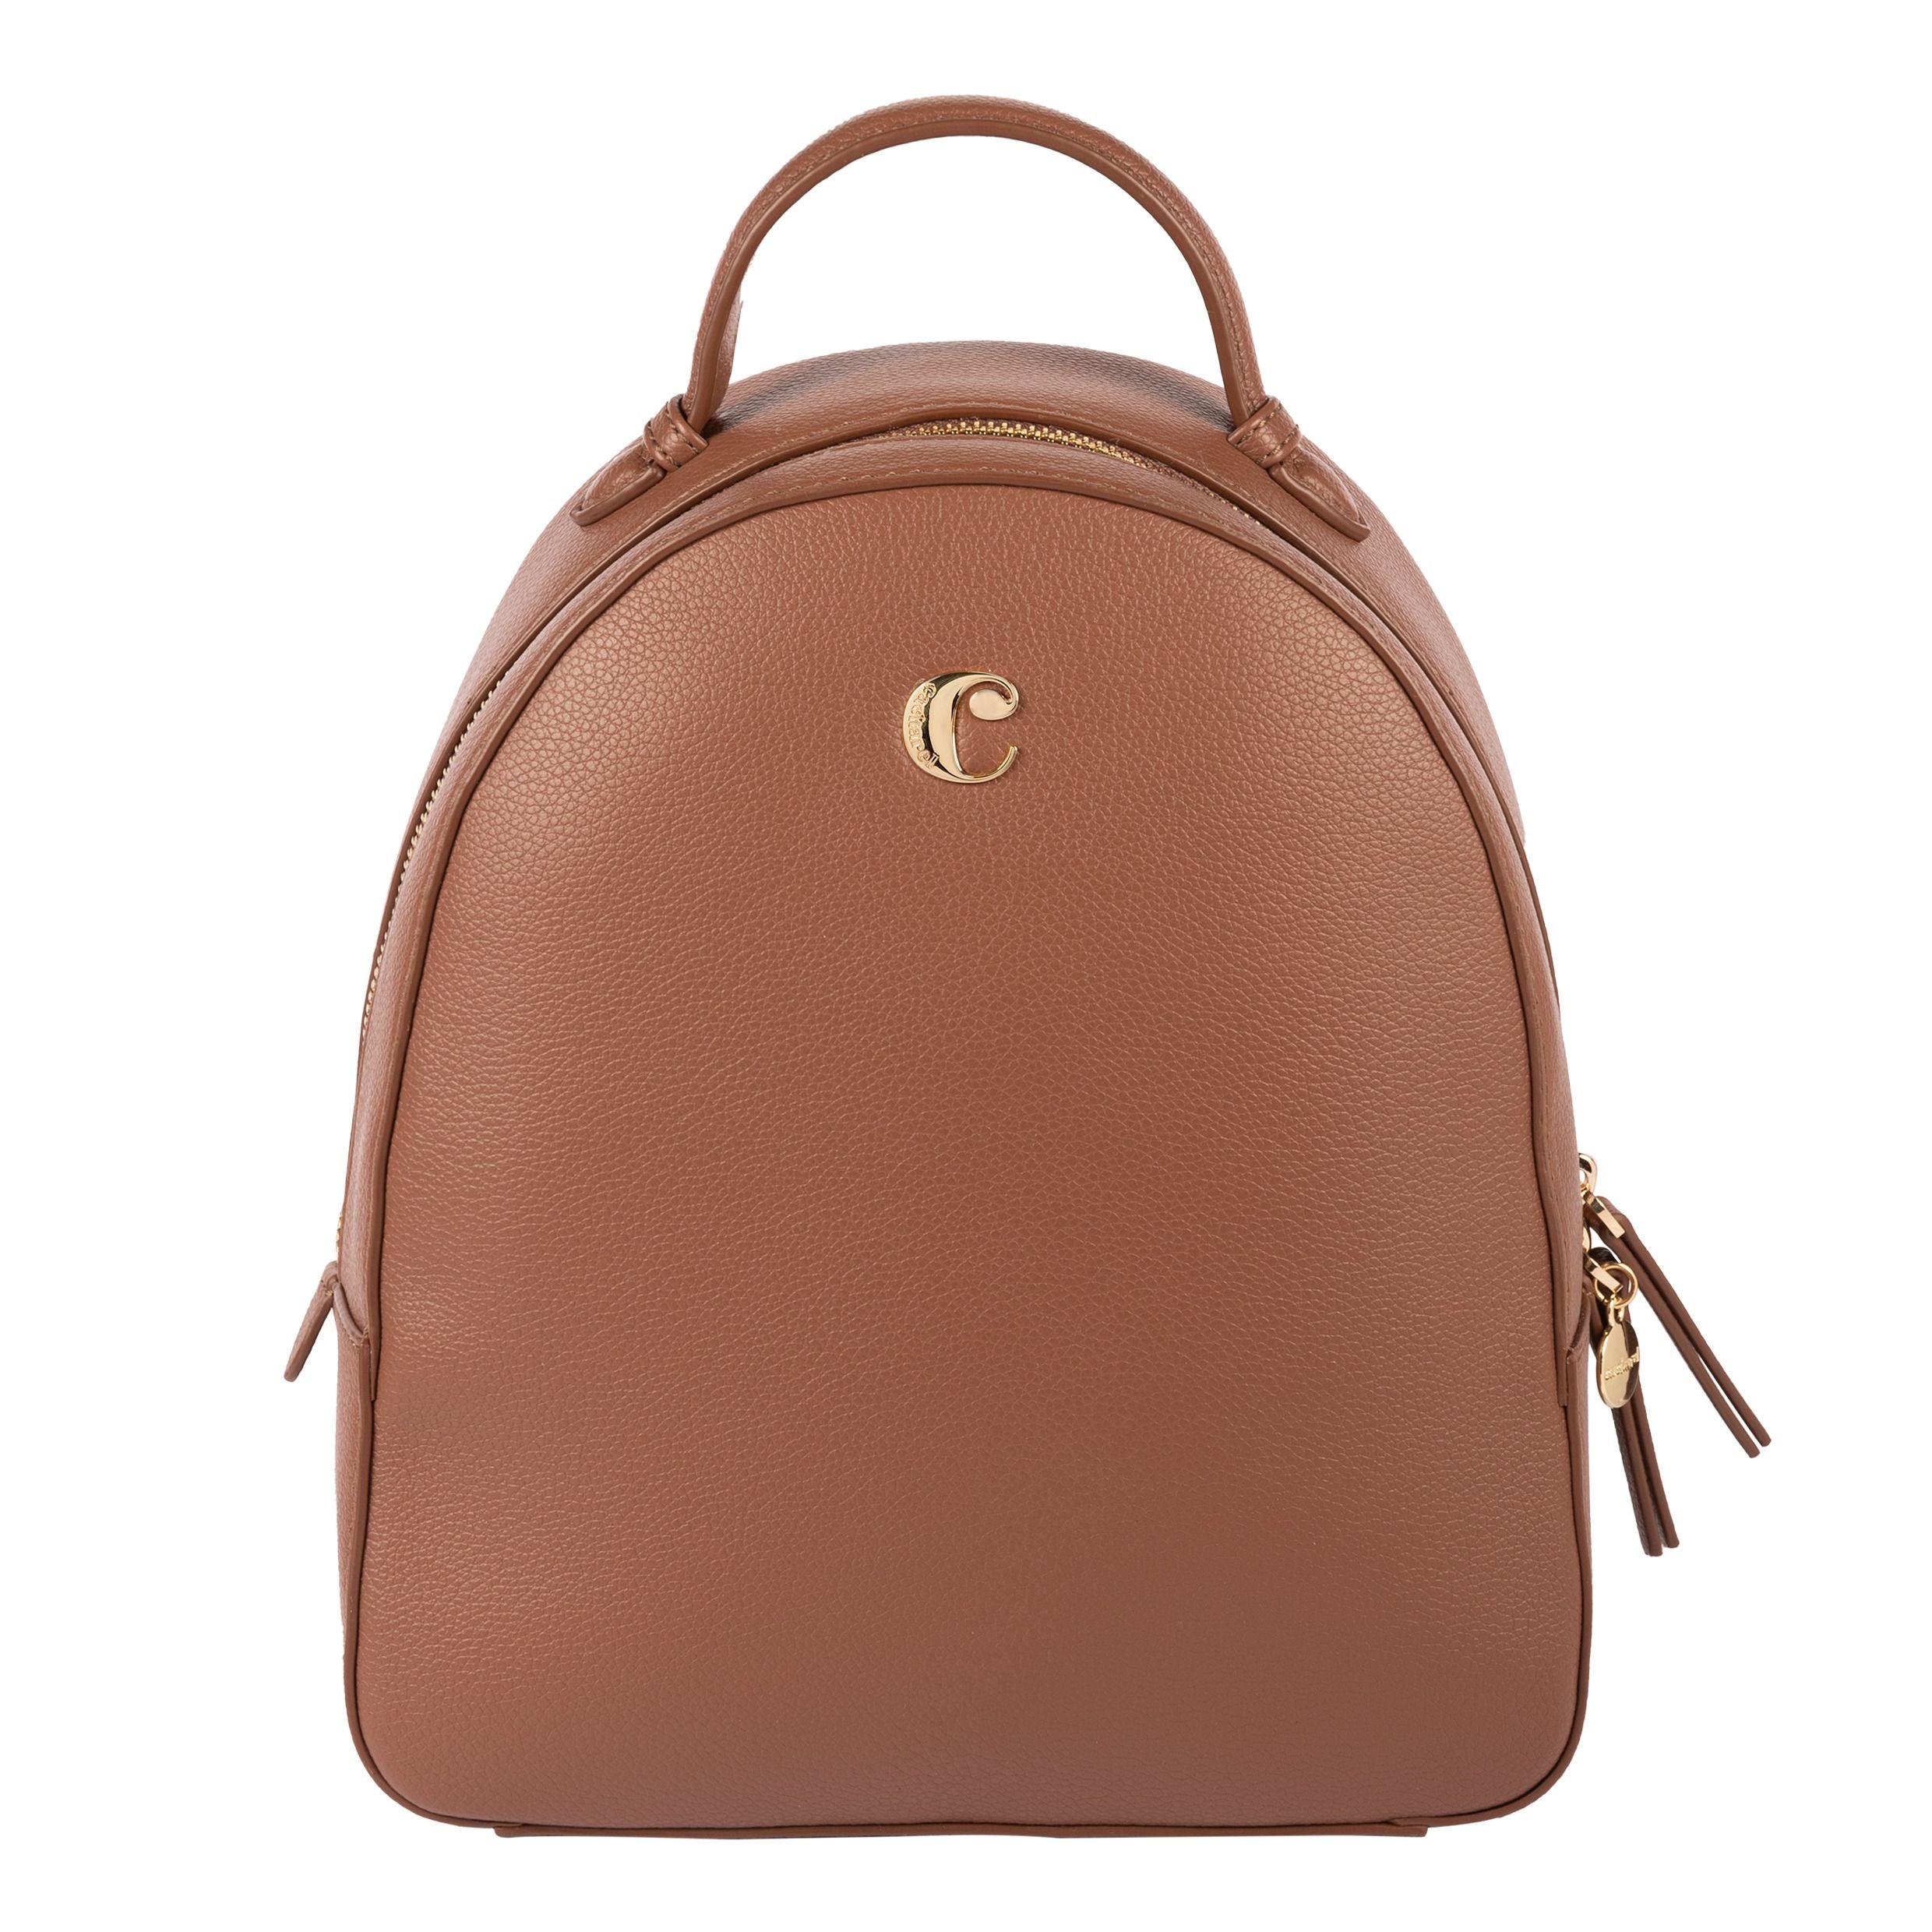 Buy THE COBBLEROAD OLD SCHOOL RUCKSACK/CAMEL LEATHER BACKPACK at Amazon.in